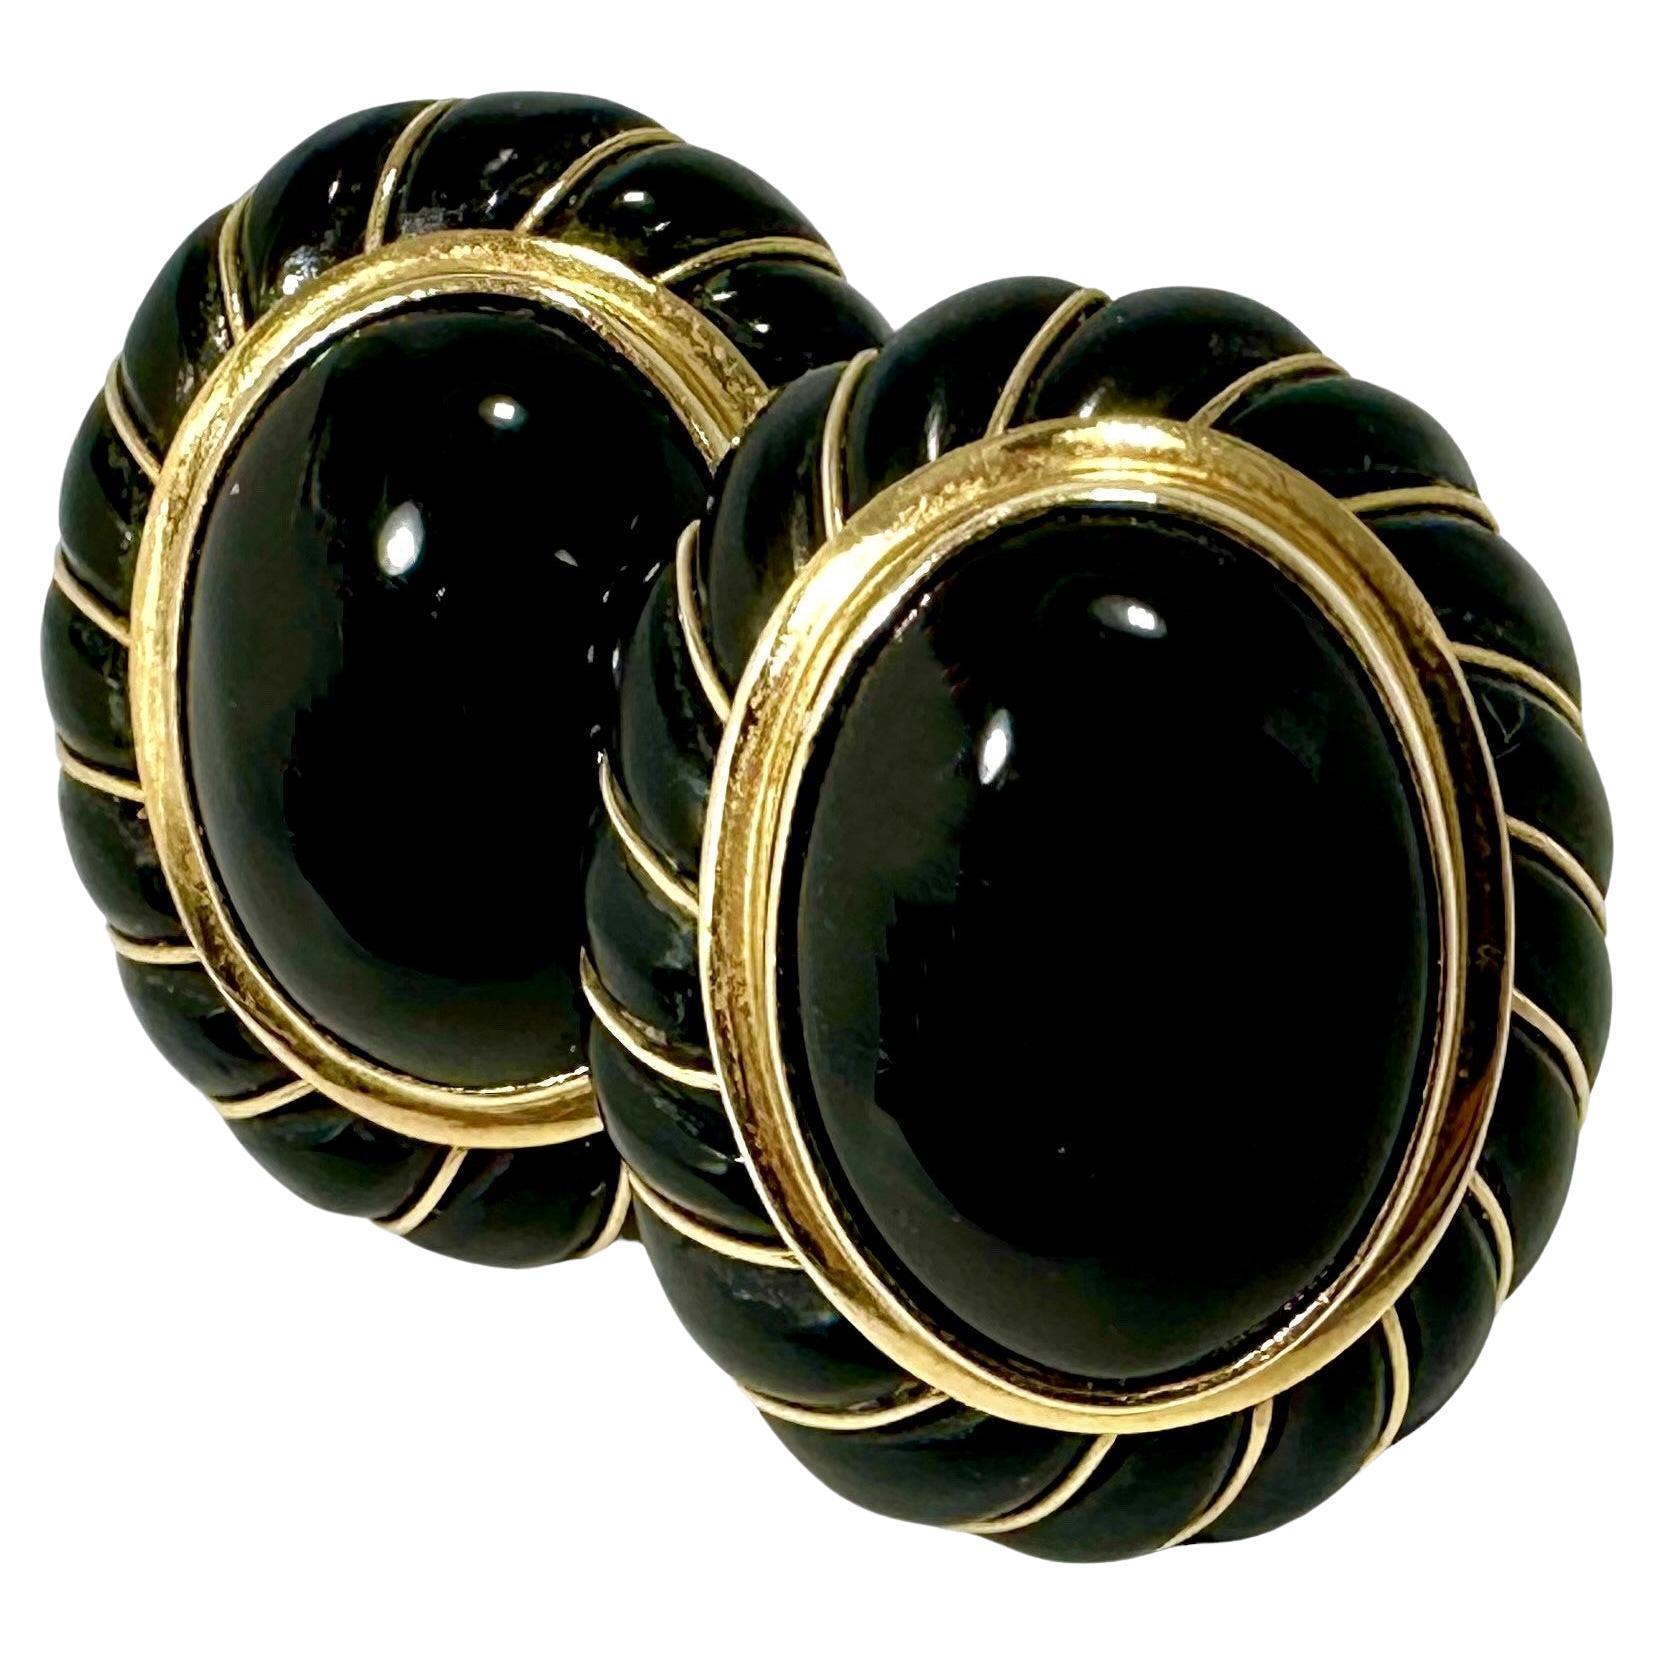 Tailored, Vintage 14K Gold and Black Onyx Oval Shaped Earrings by Designer Maz